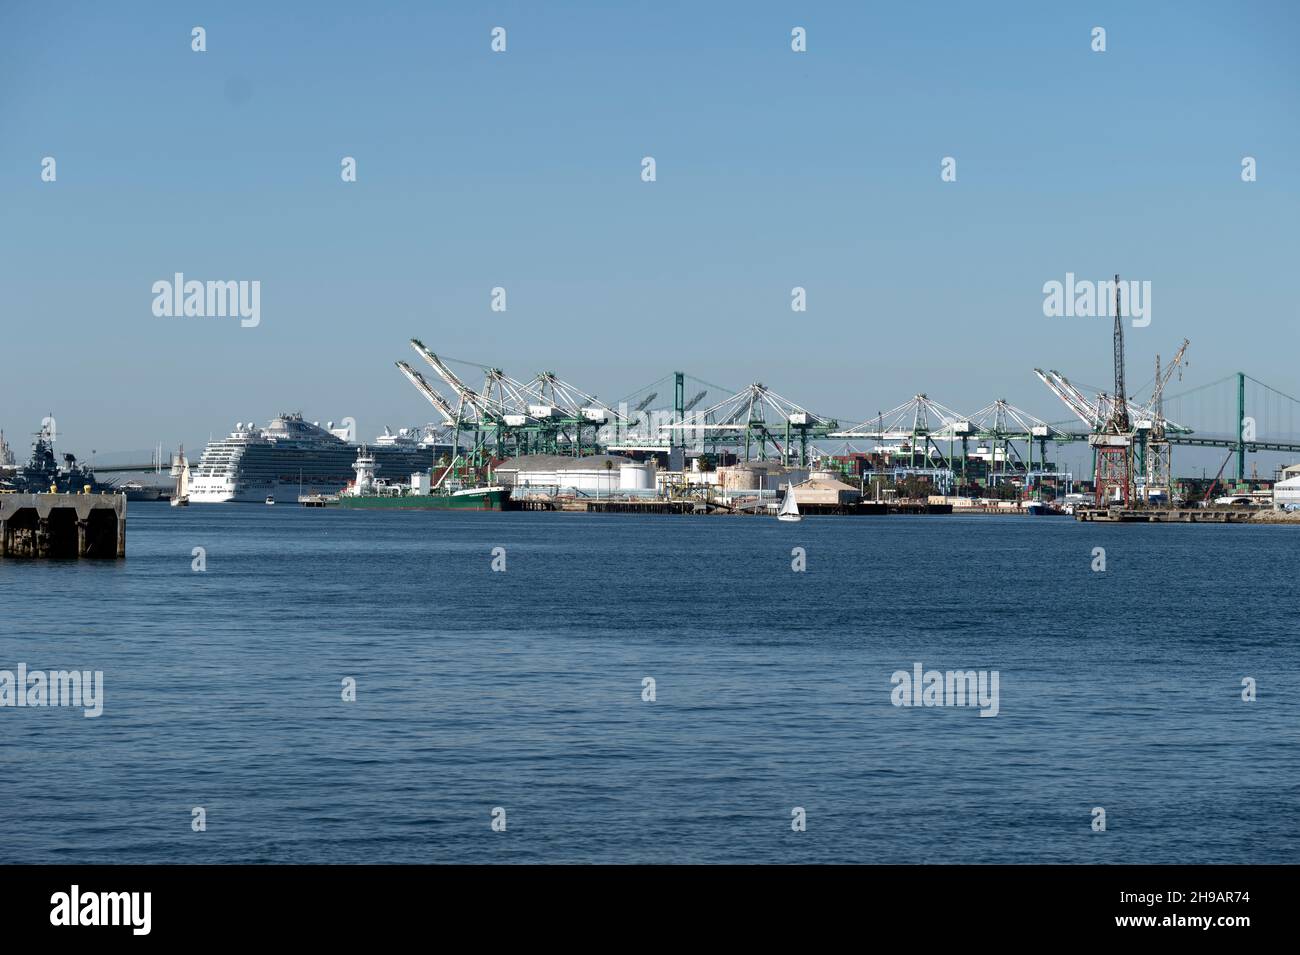 Cruise ship docked at the Port of Los Angeles near gantry cranes in the shipping yards Stock Photo